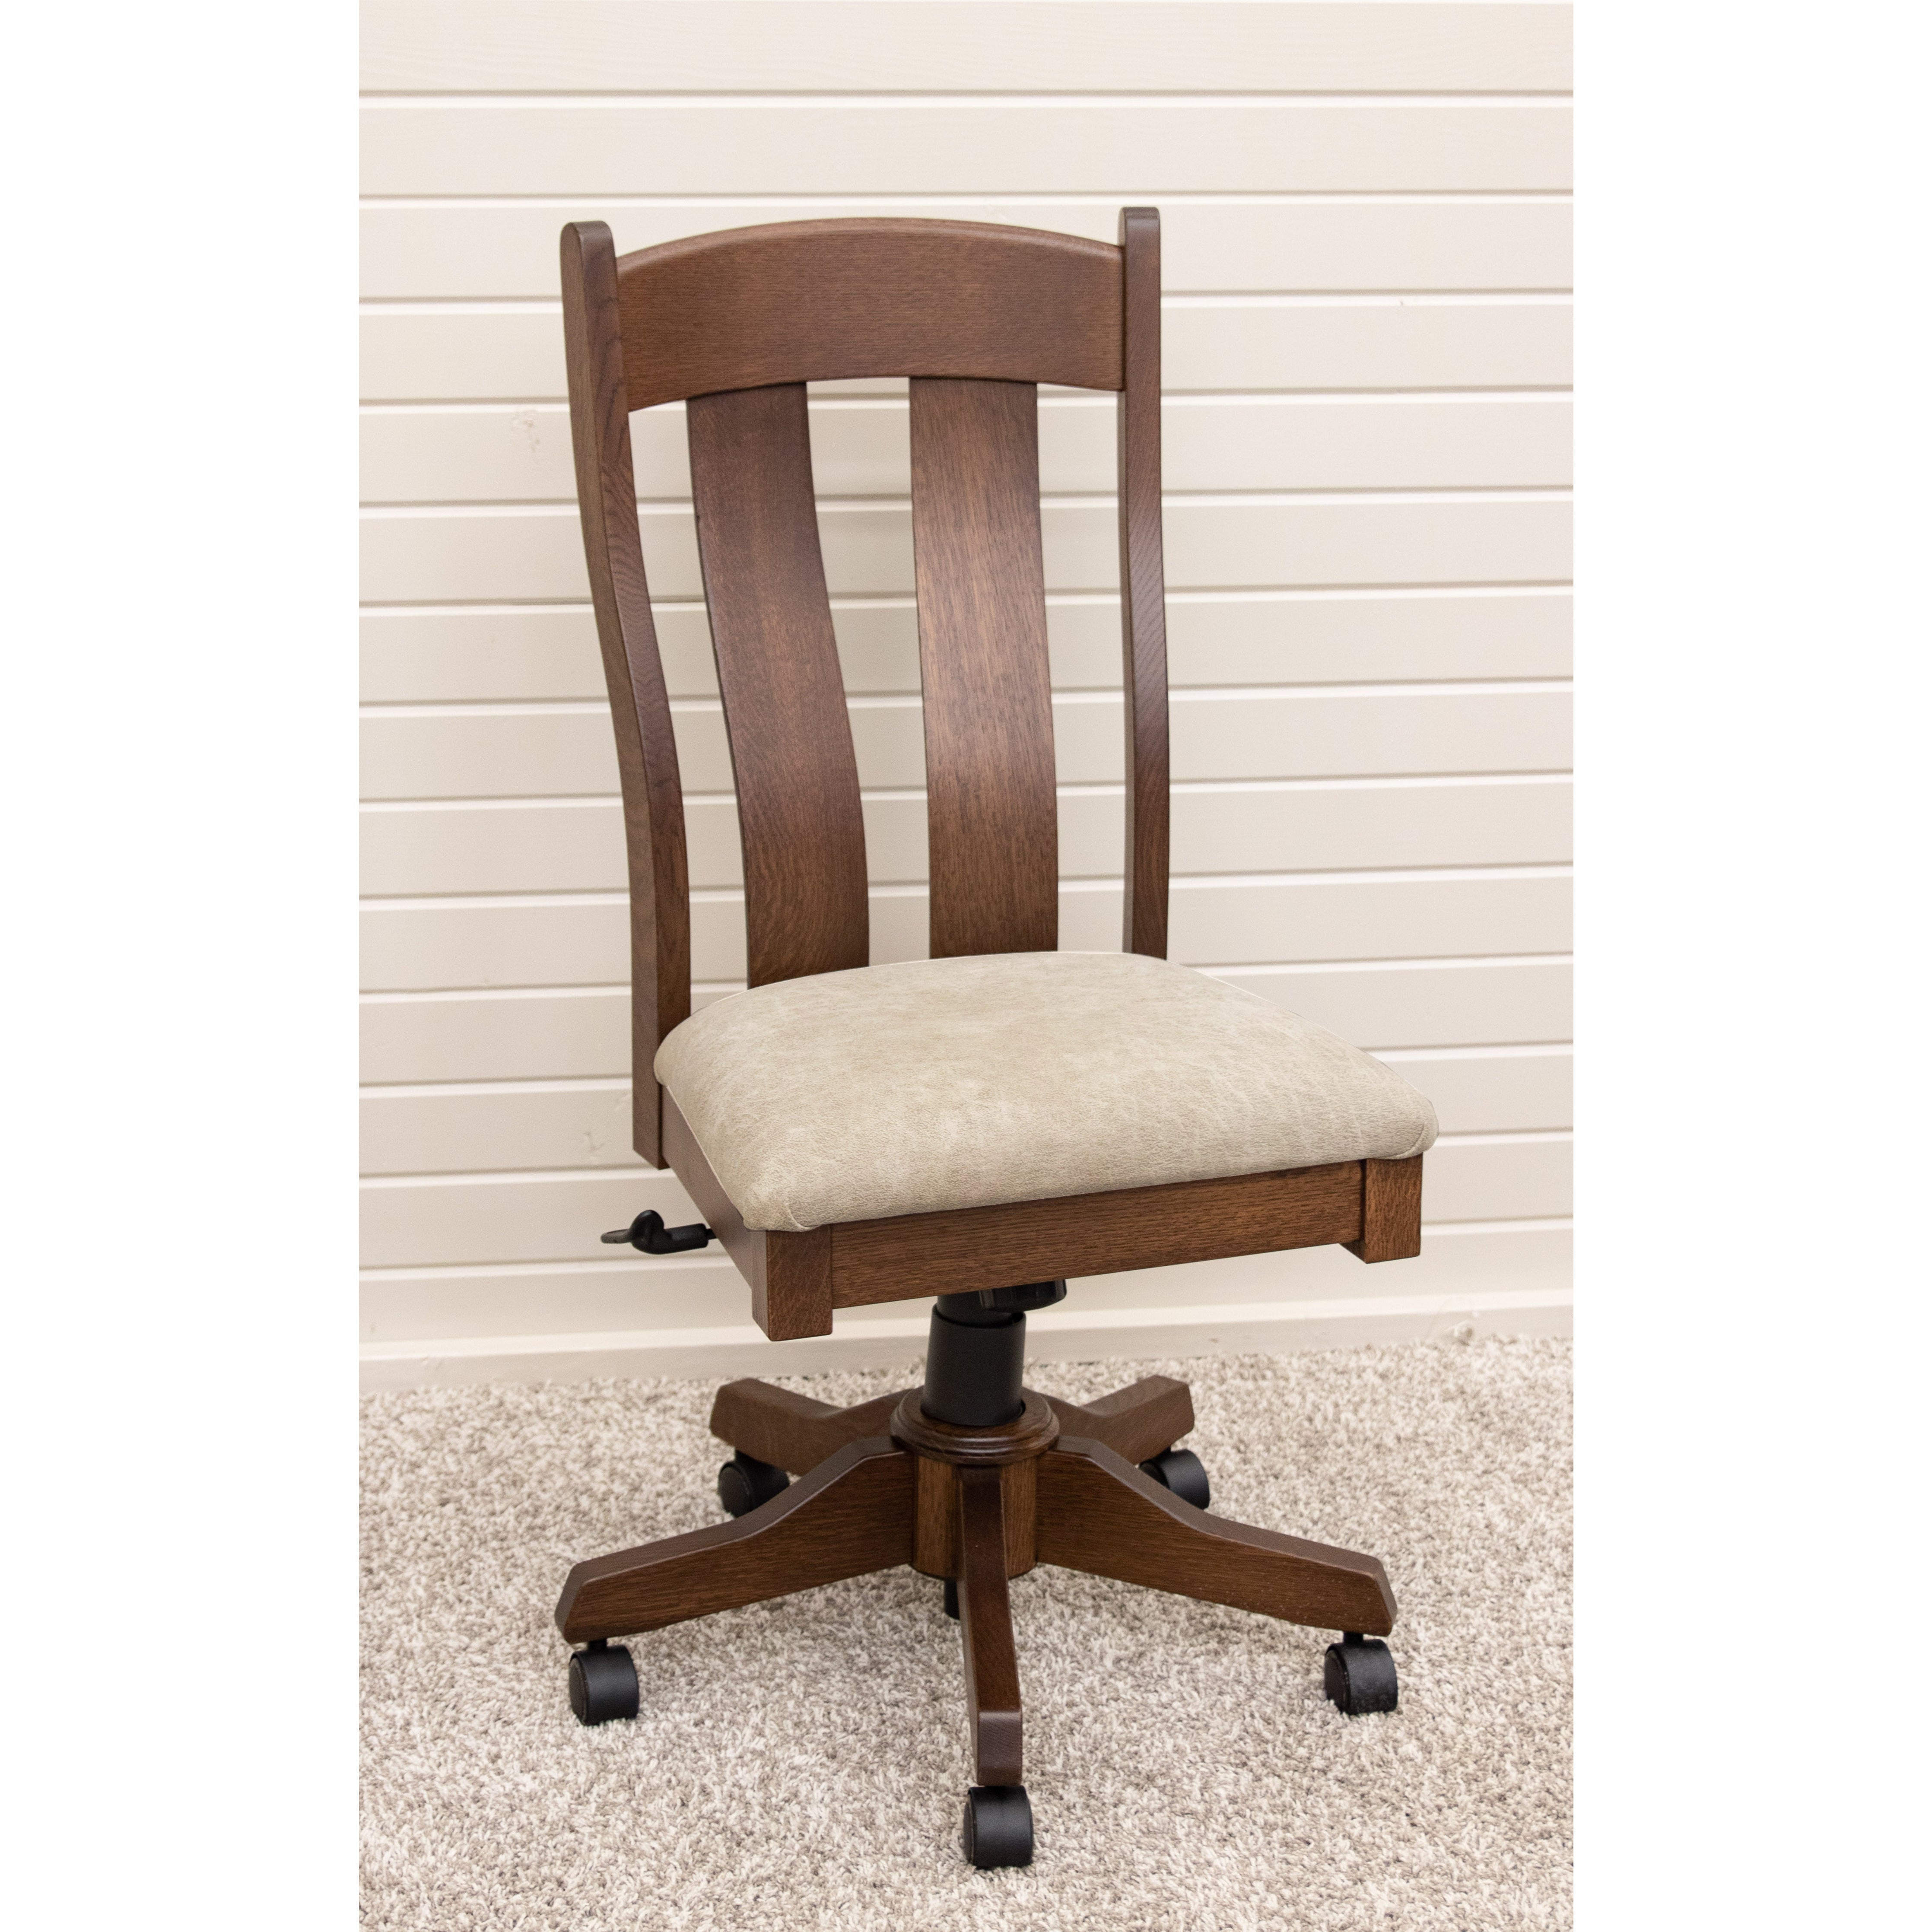 Low Back Desk Chair with Gas Lift from DutchCrafters Amish Furniture